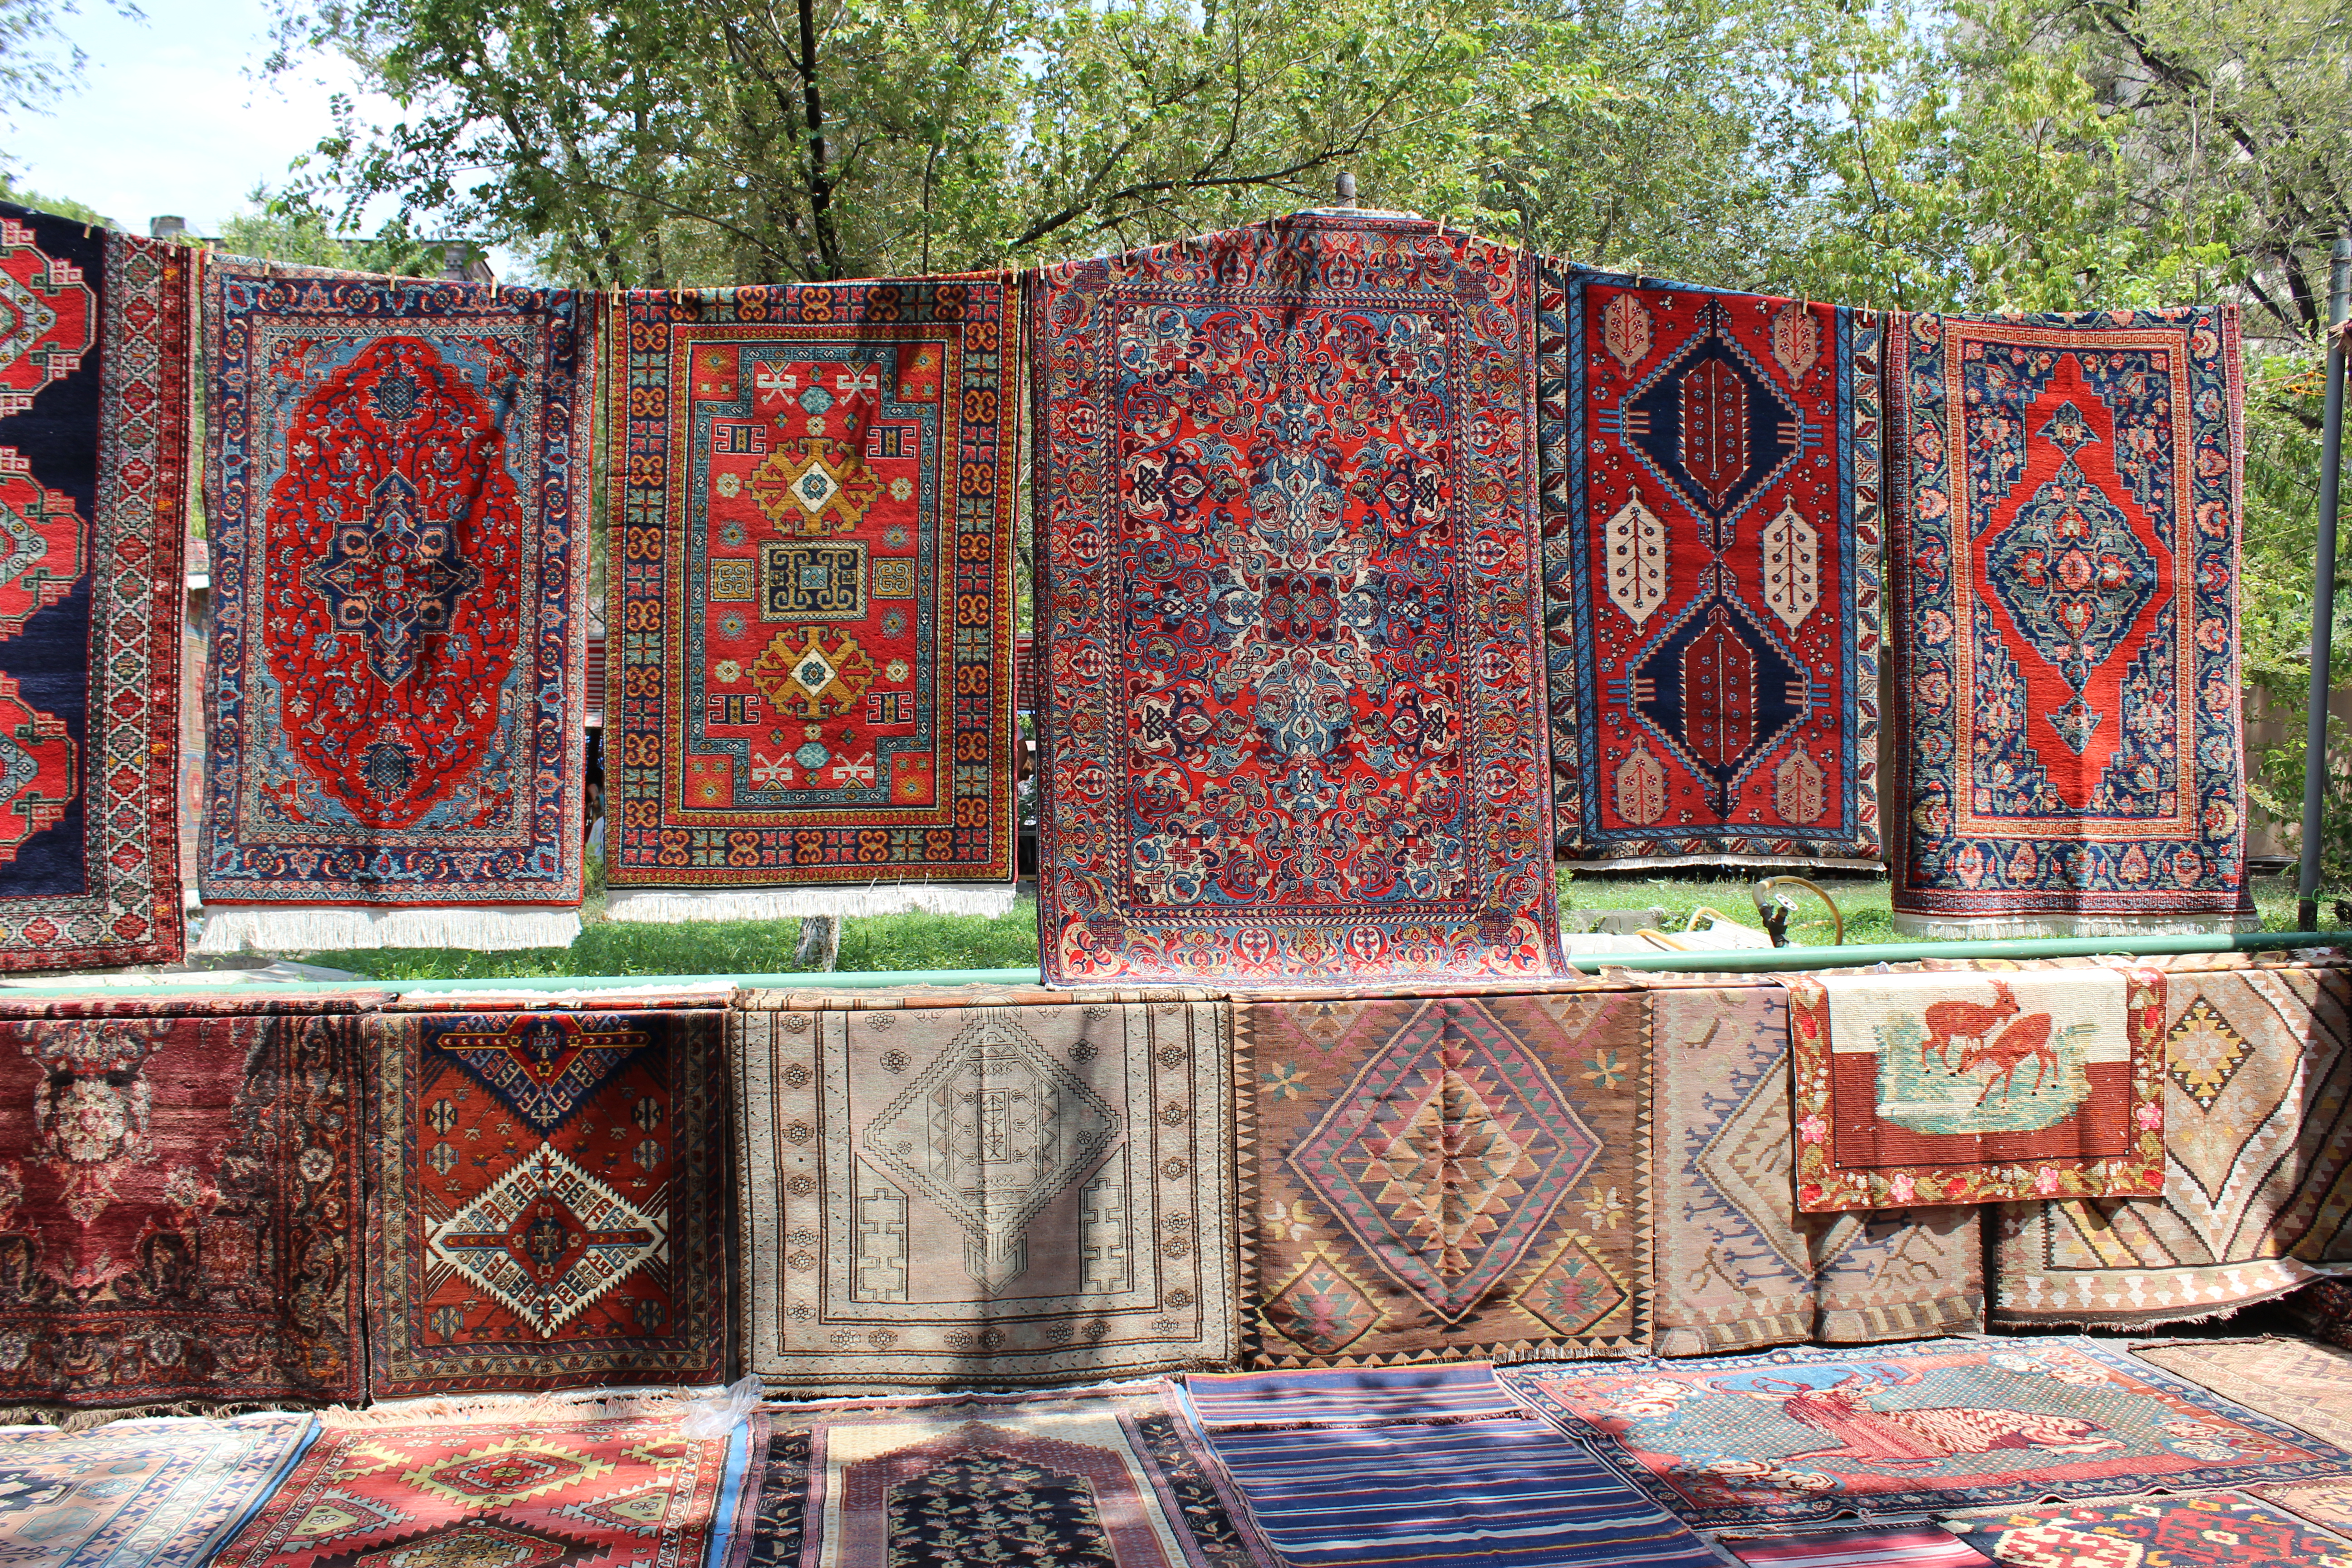 Of course they were plenty of oriental rugs as well, though I consider flea market the worst place to buy them. Still sometimes you can find some interesting pieces even here. 